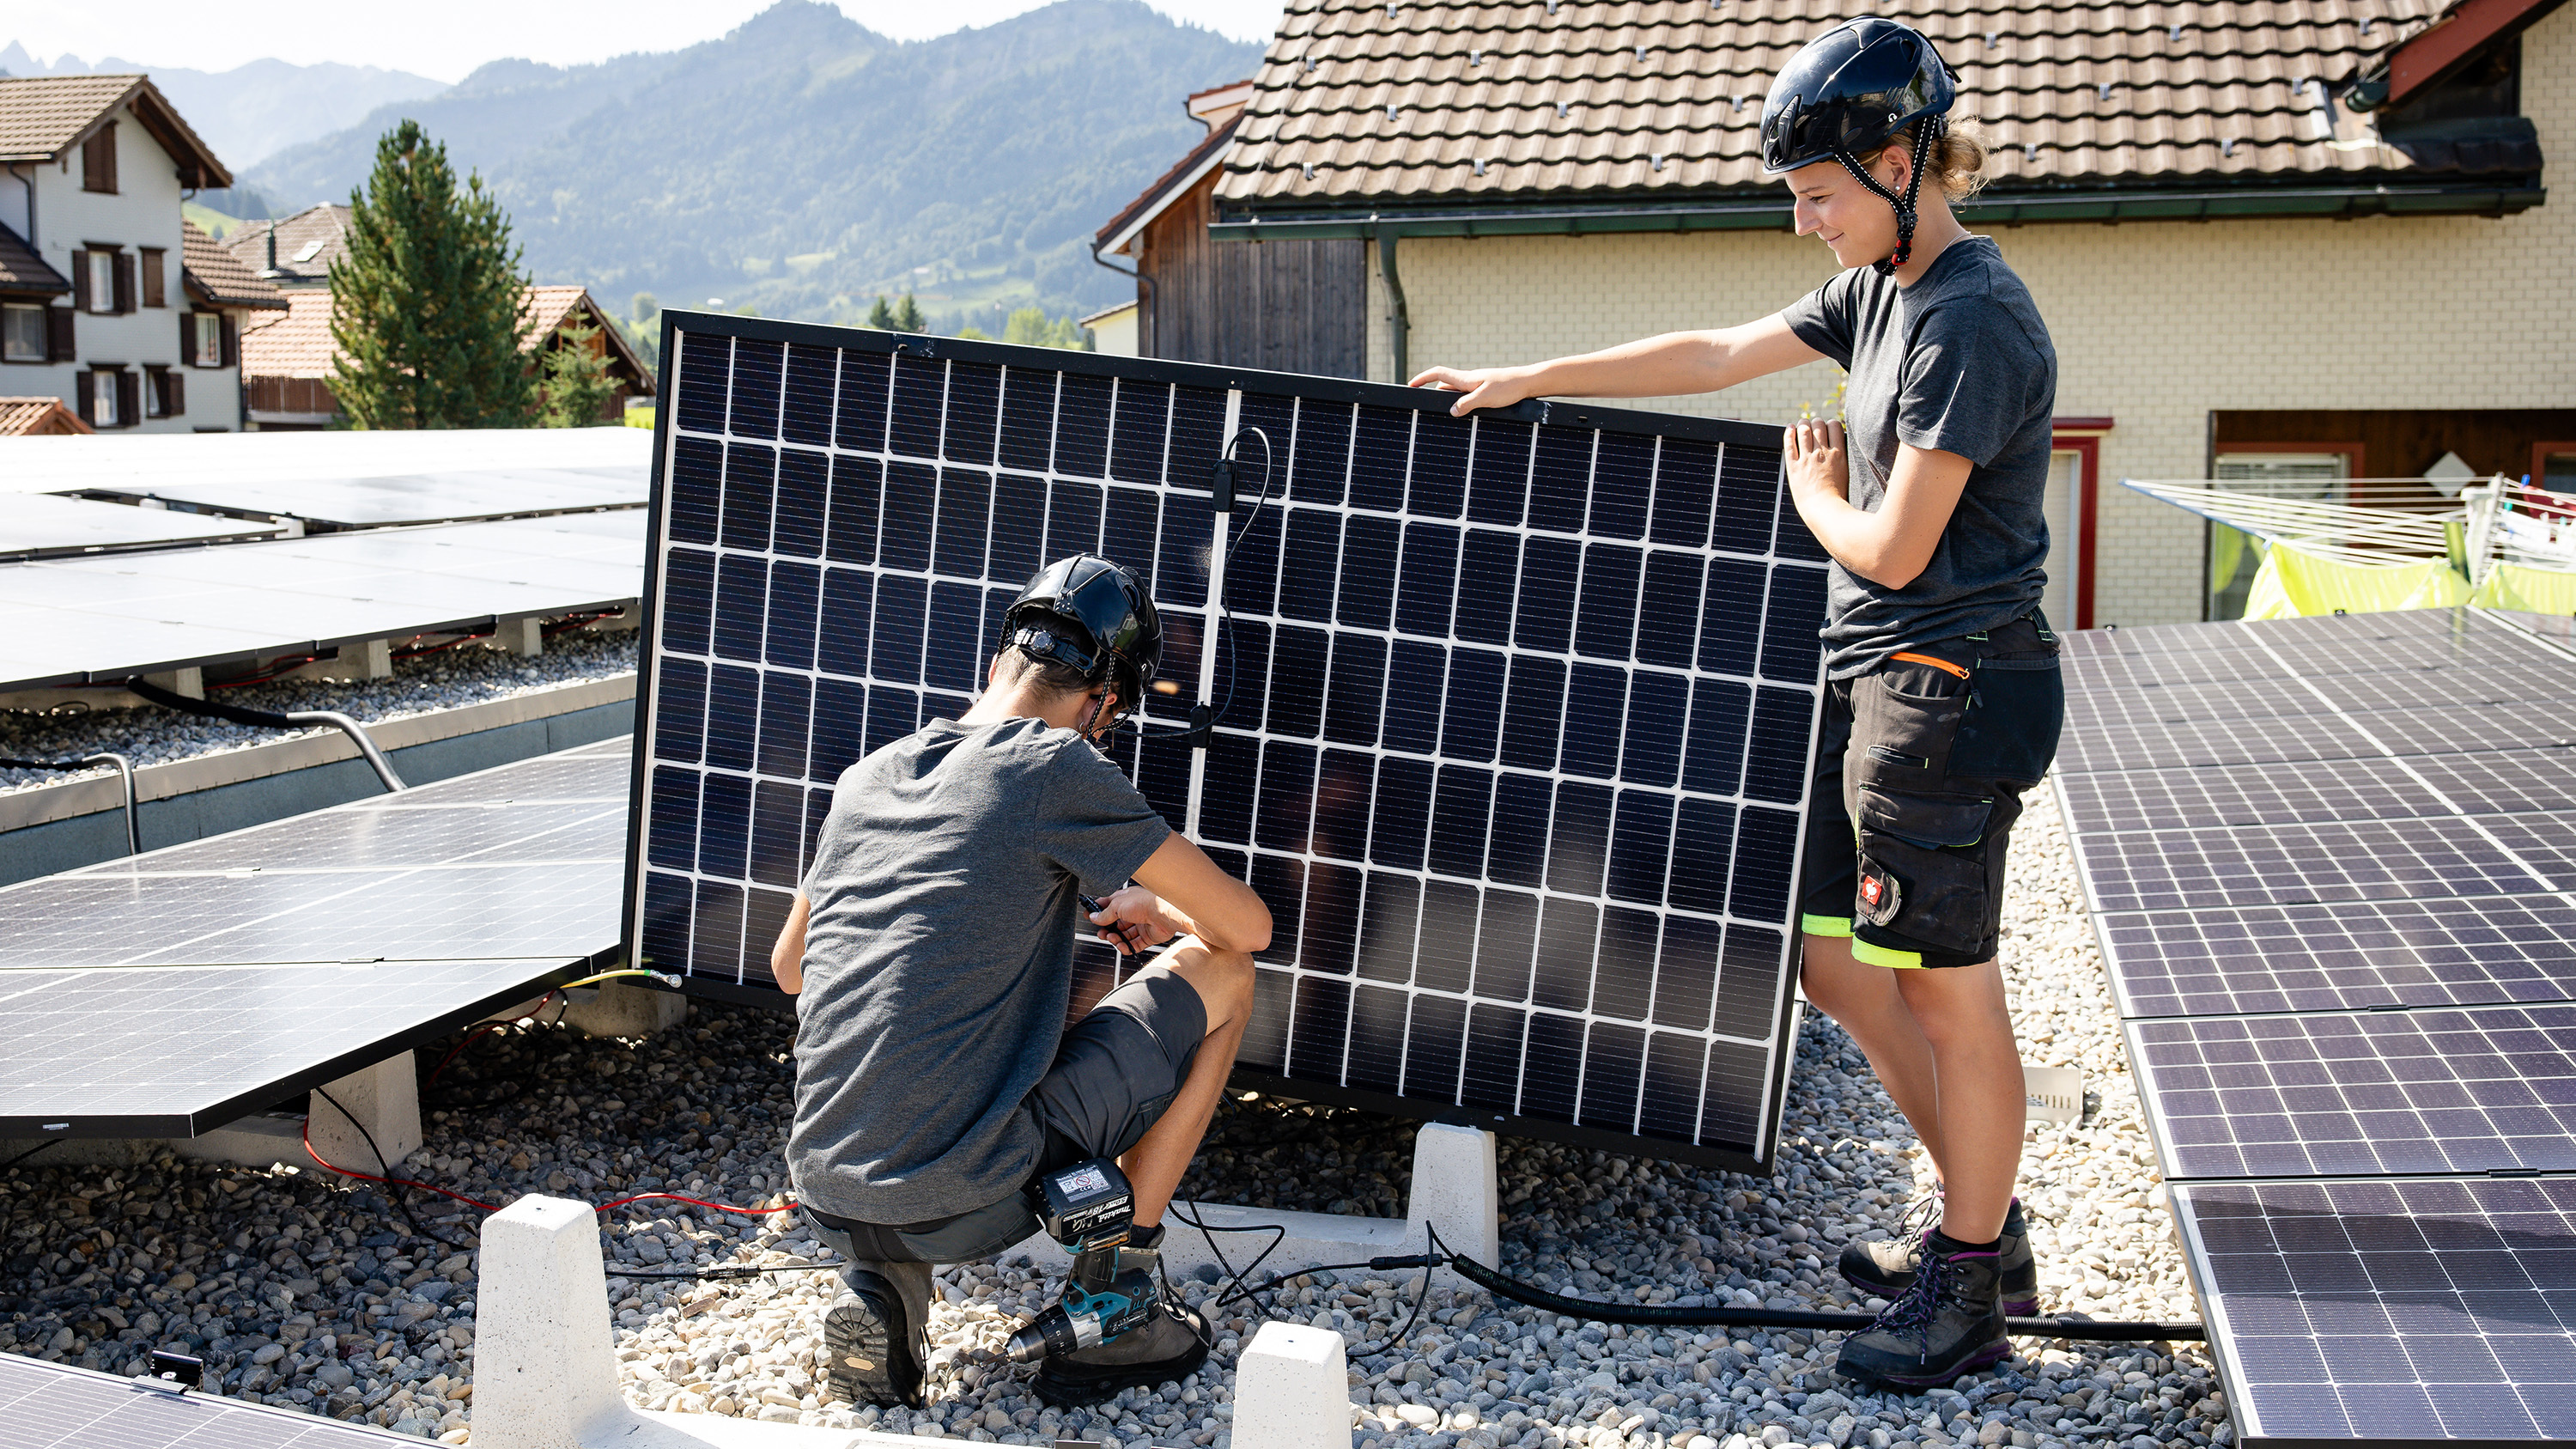 Two apprentices in work clothes and helmets work on solar panels on a flat roof.